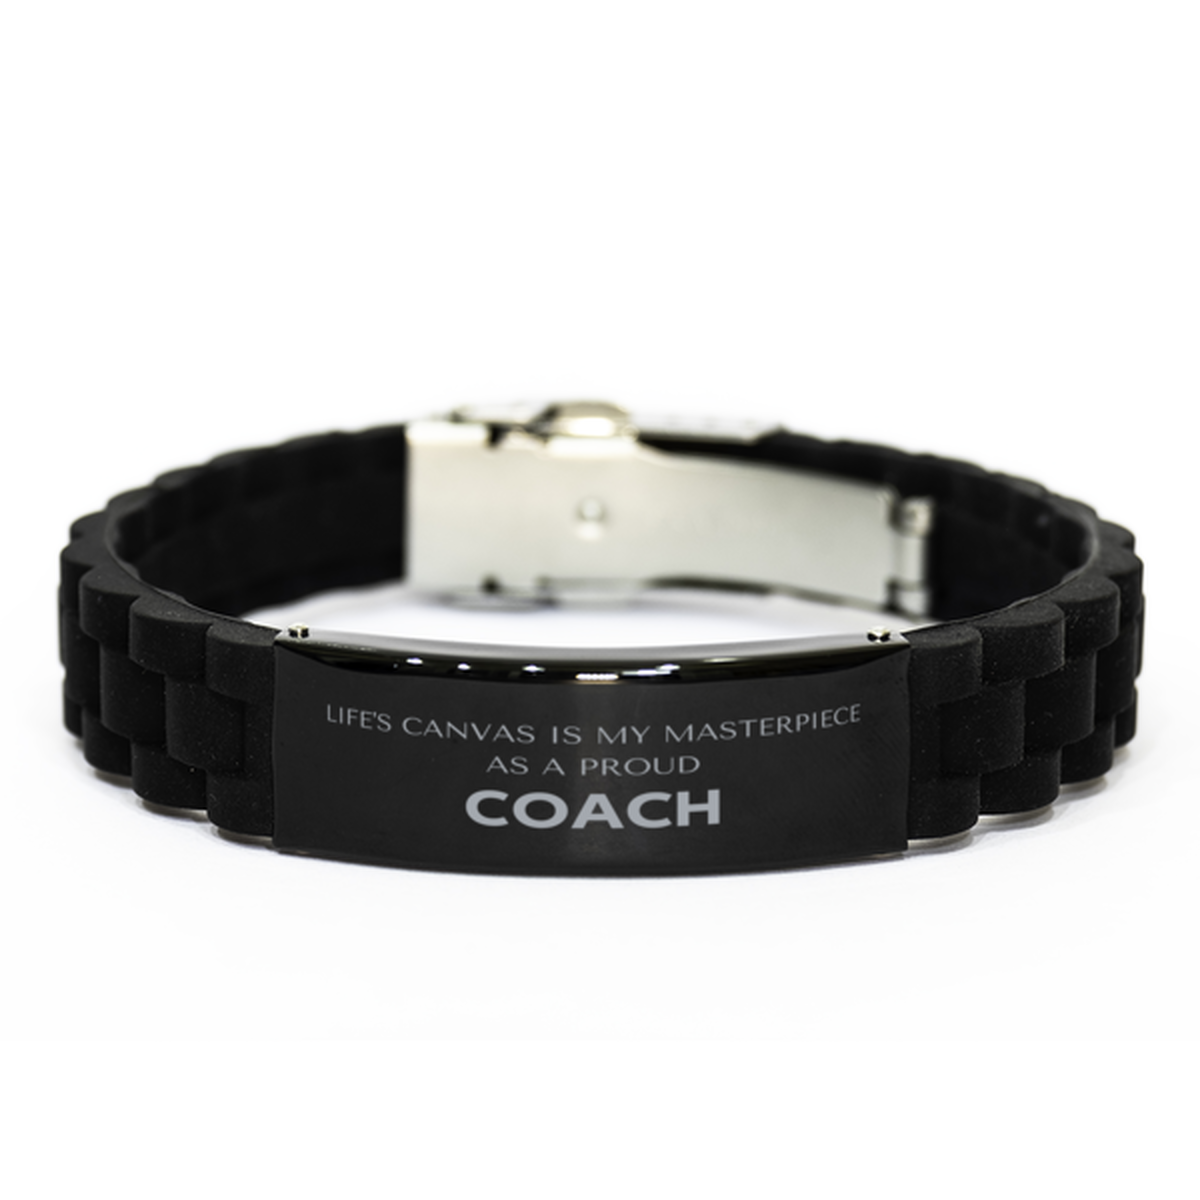 Proud Coach Gifts, Life's canvas is my masterpiece, Epic Birthday Christmas Unique Black Glidelock Clasp Bracelet For Coach, Coworkers, Men, Women, Friends